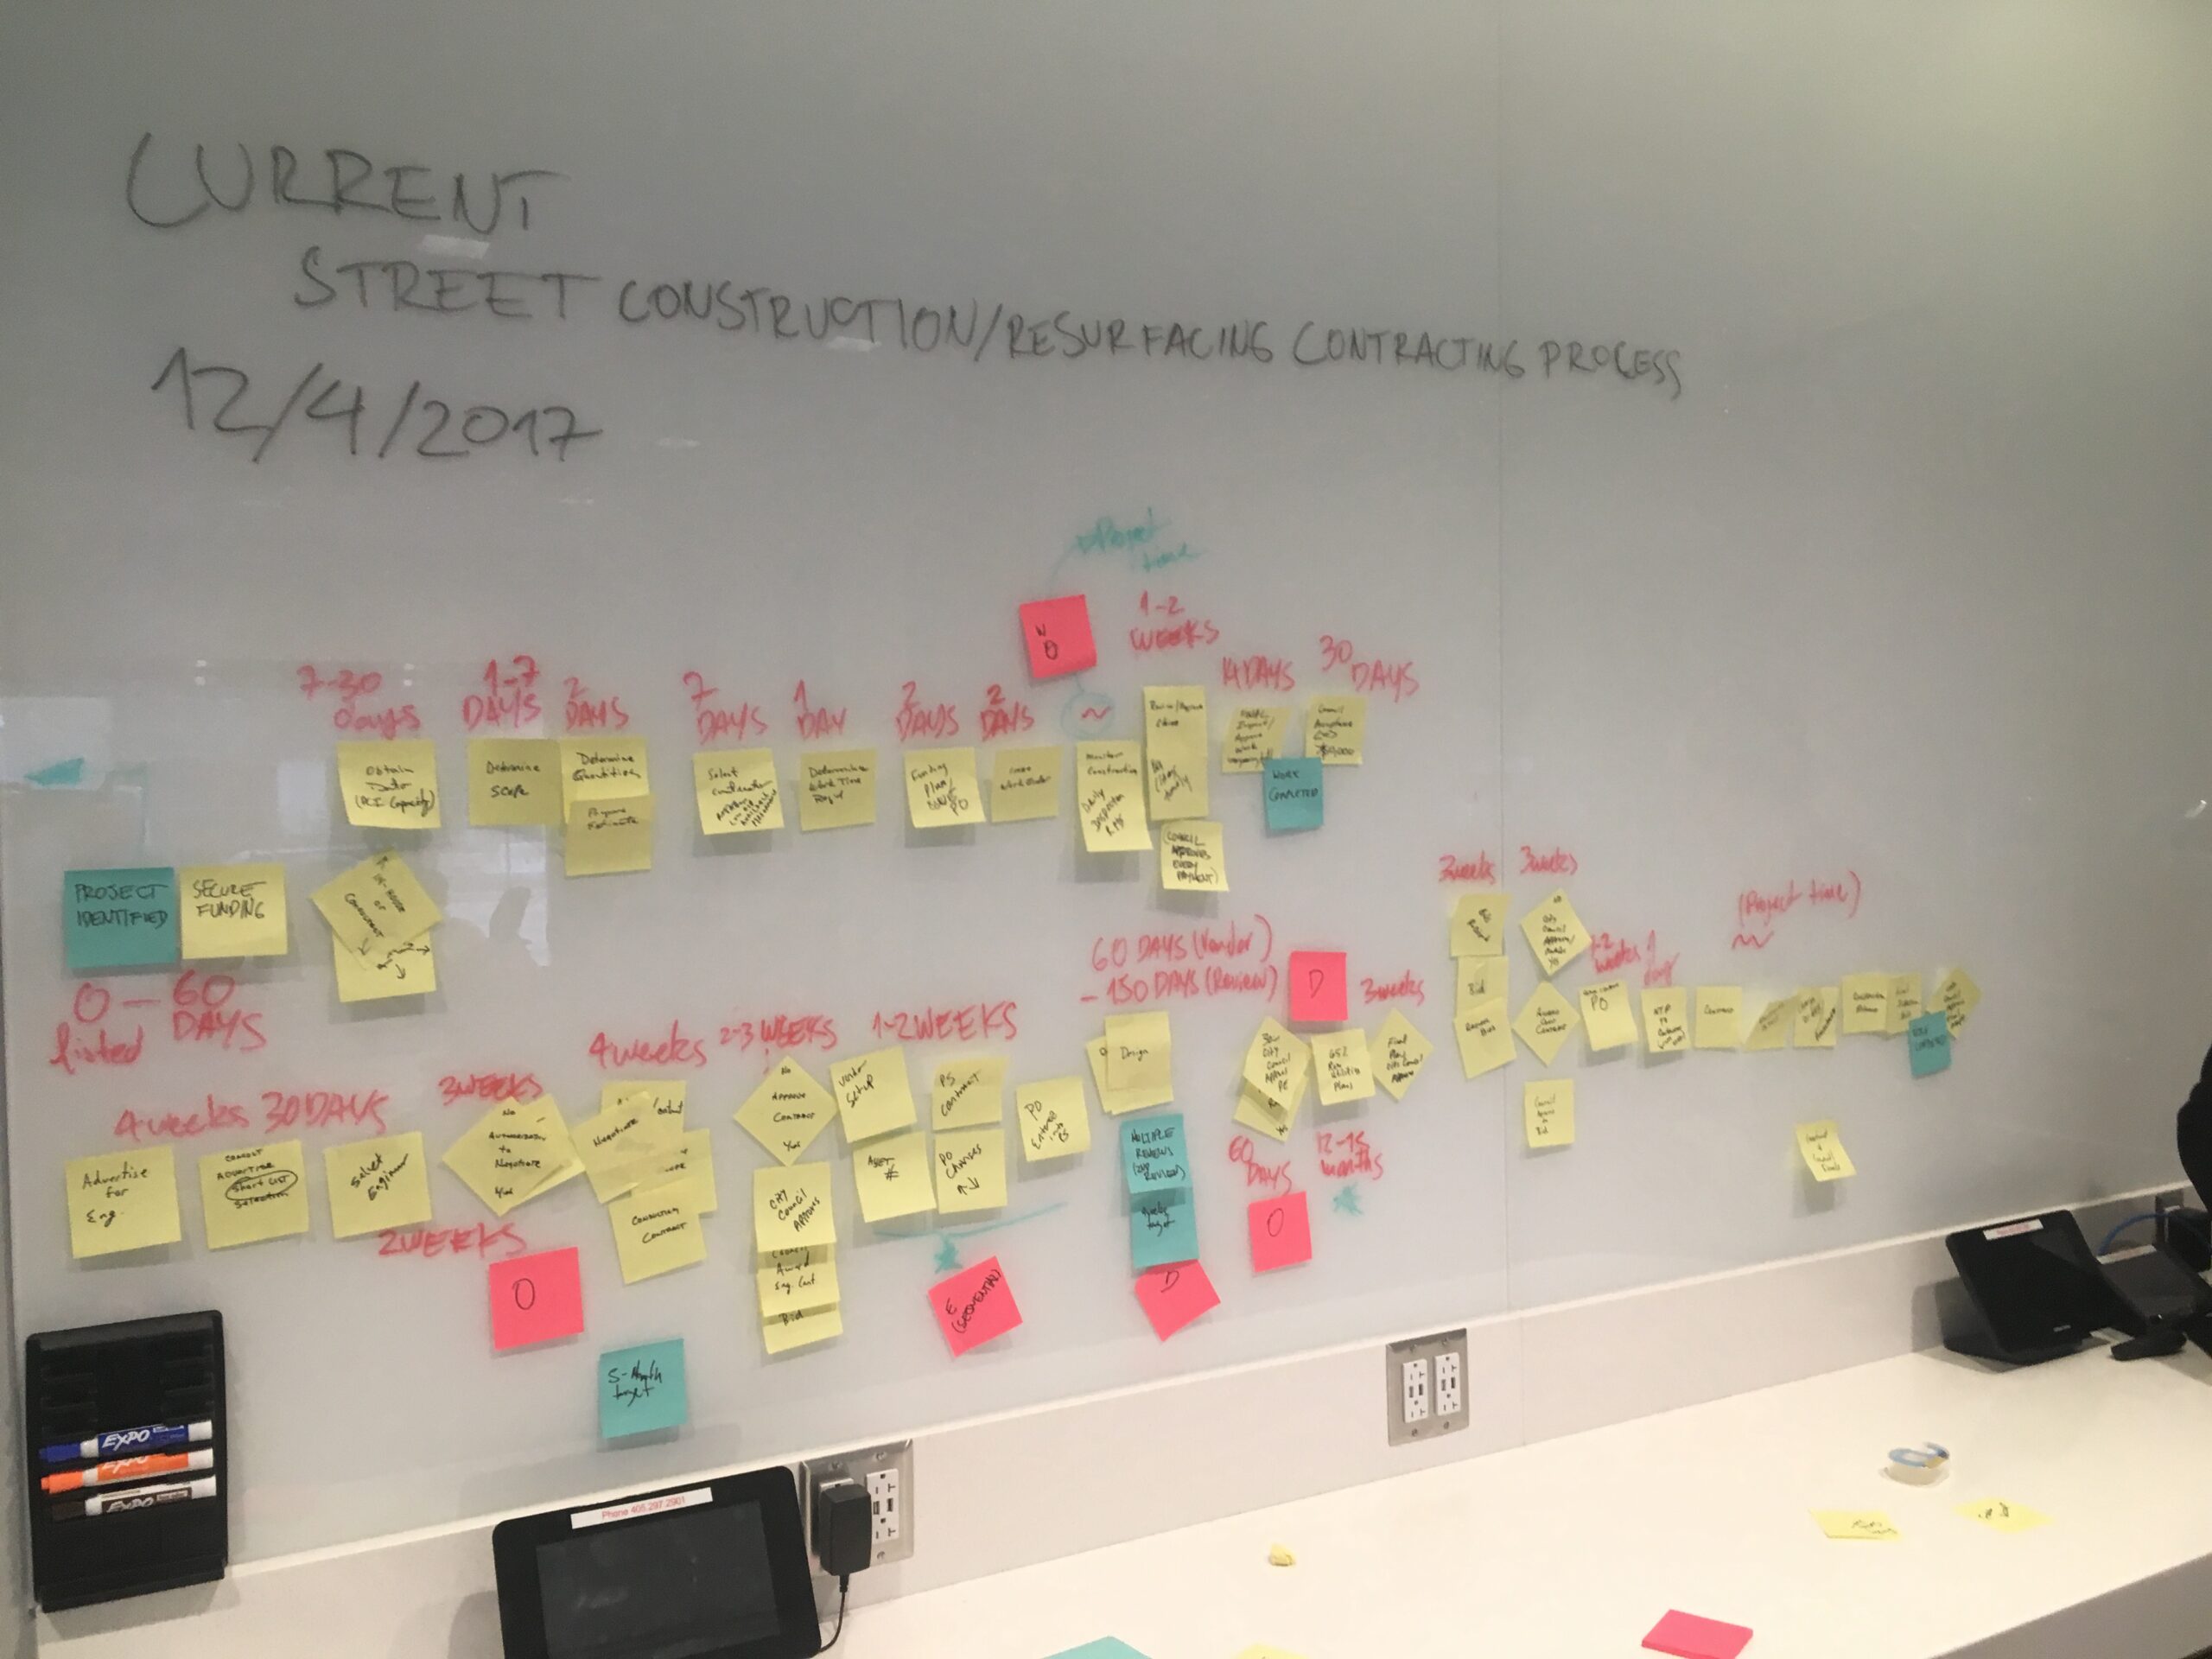 Image of process map with post-it notes